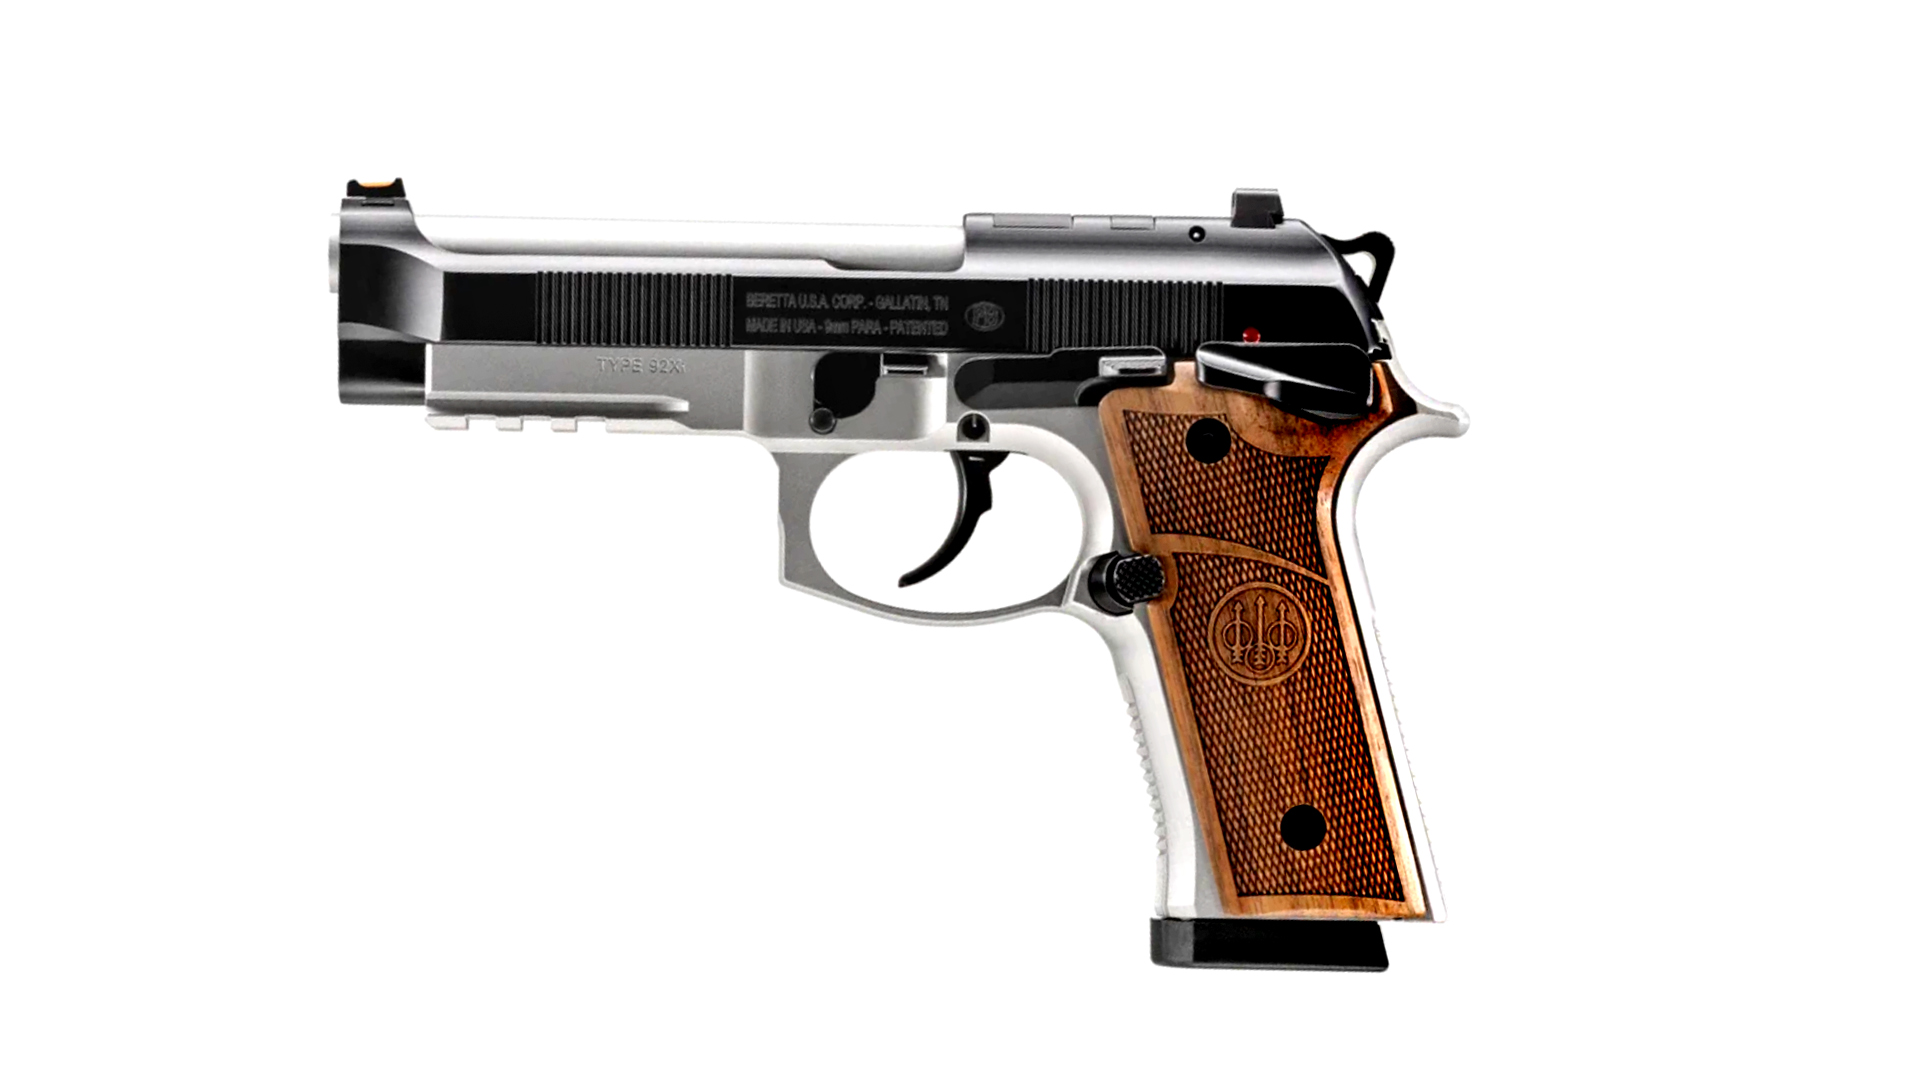 Left side of the Beretta 92GTS Launch Edition, with a two-tone black and silver finish, along with wood grips.